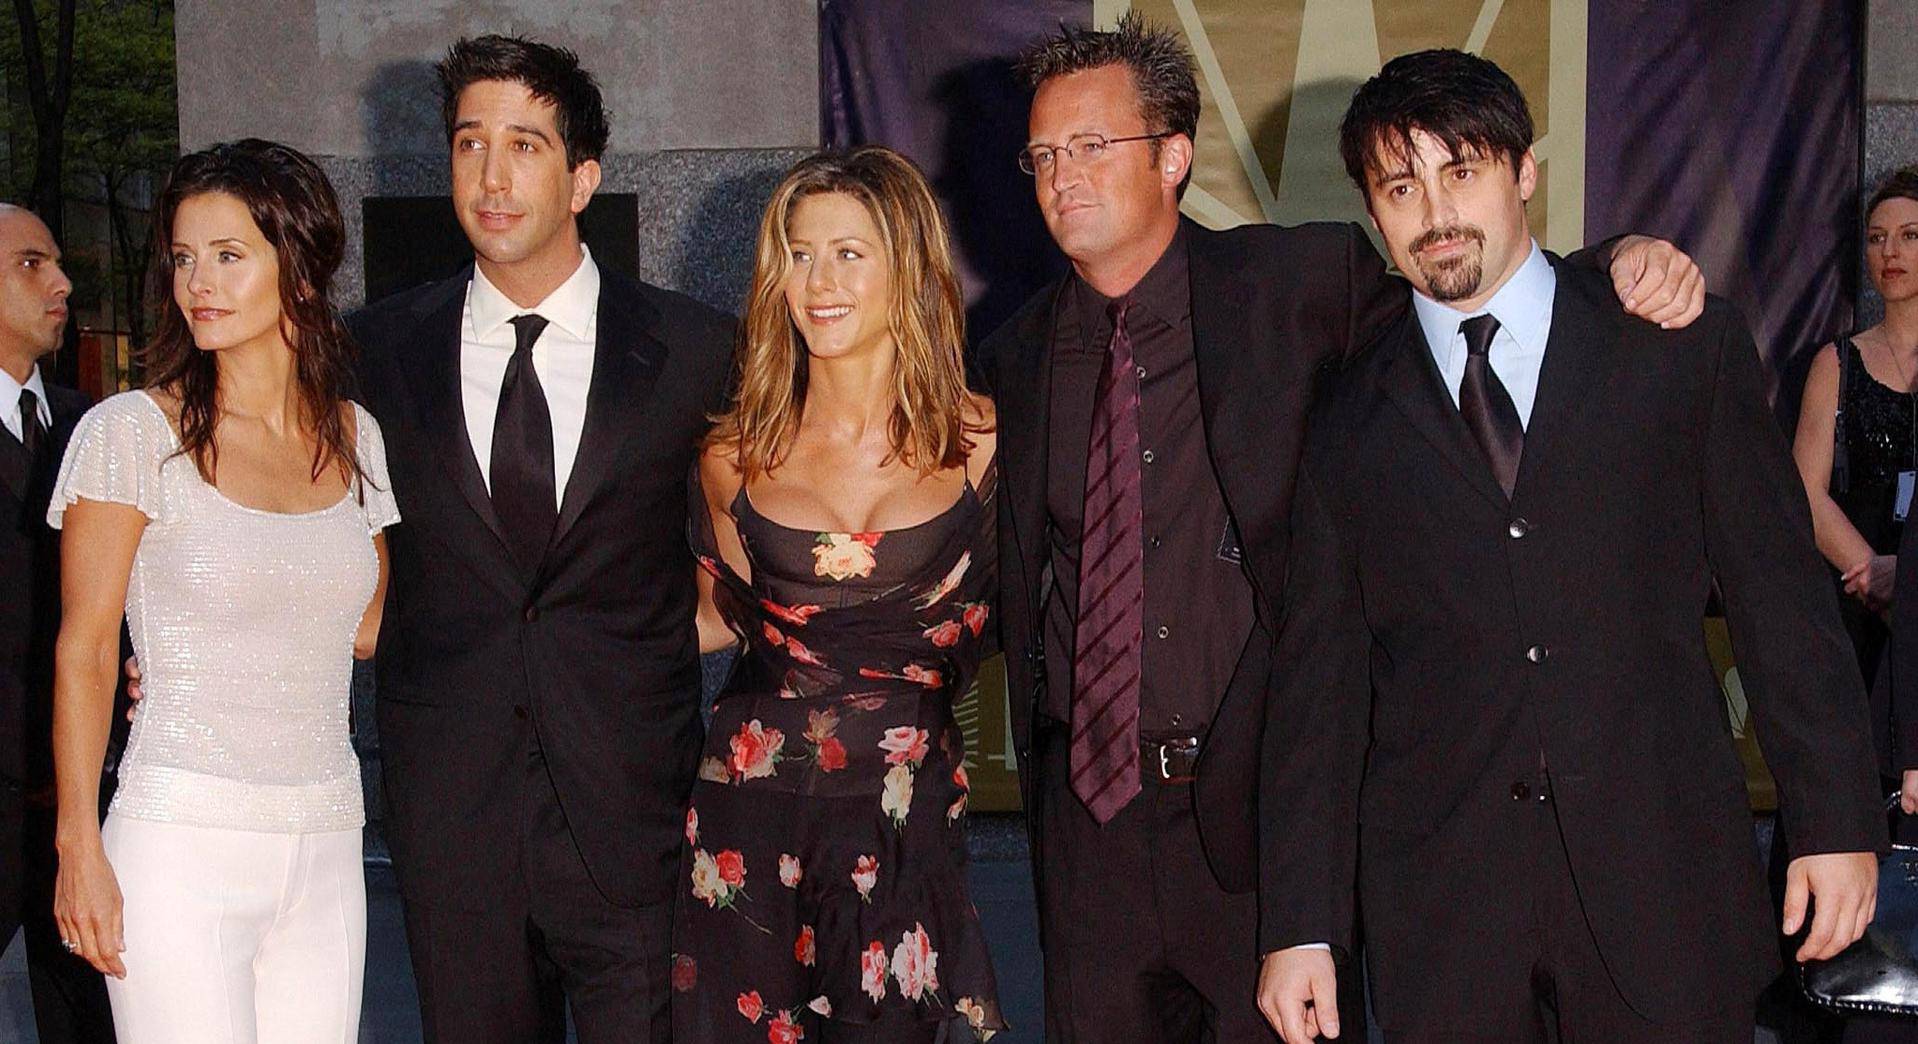 FILE PHOTO: FRIENDS CAST ARRIVES AT THE NBC 75TH ANNIVERSARY PARTY.